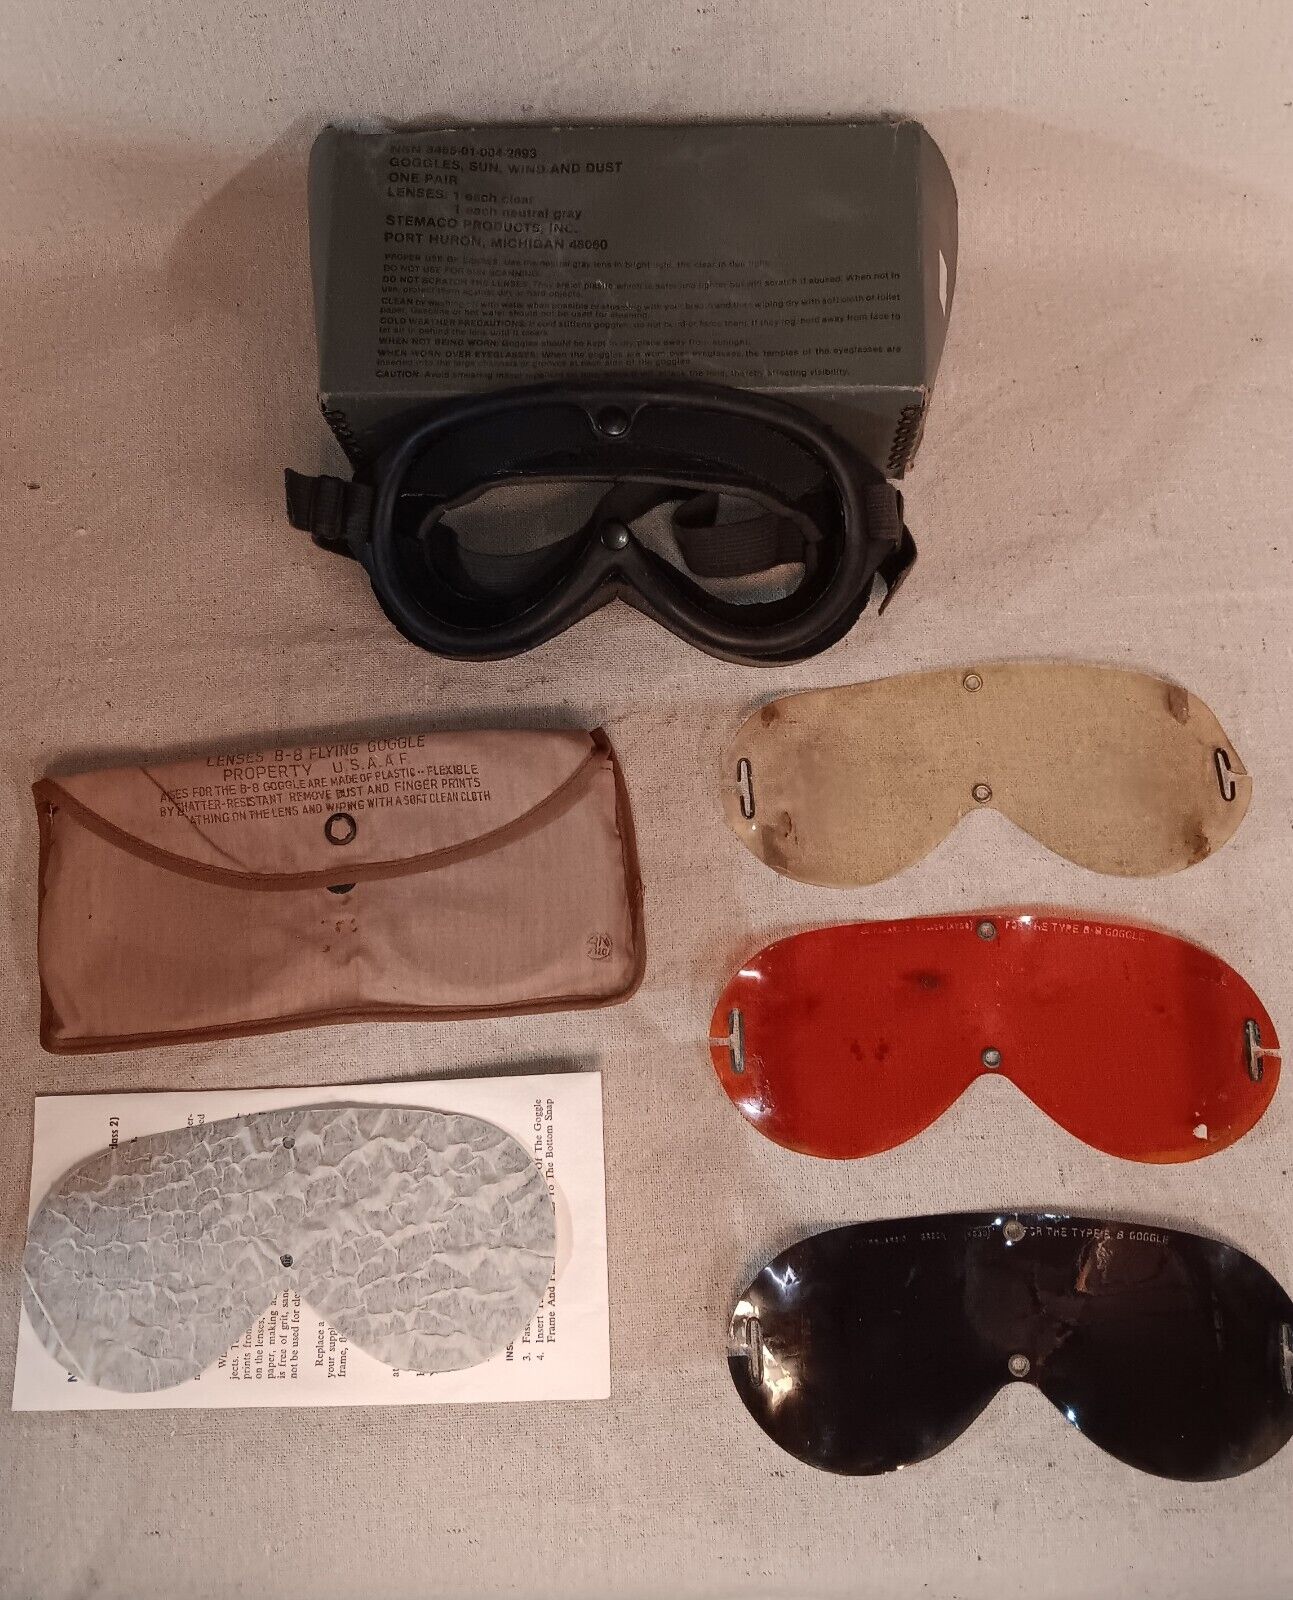 US ARMY AIR FORCES TYPE B-8 FLYING GOGGLES- ORIGINAL BOX with EXTRAS ACCESSORIES